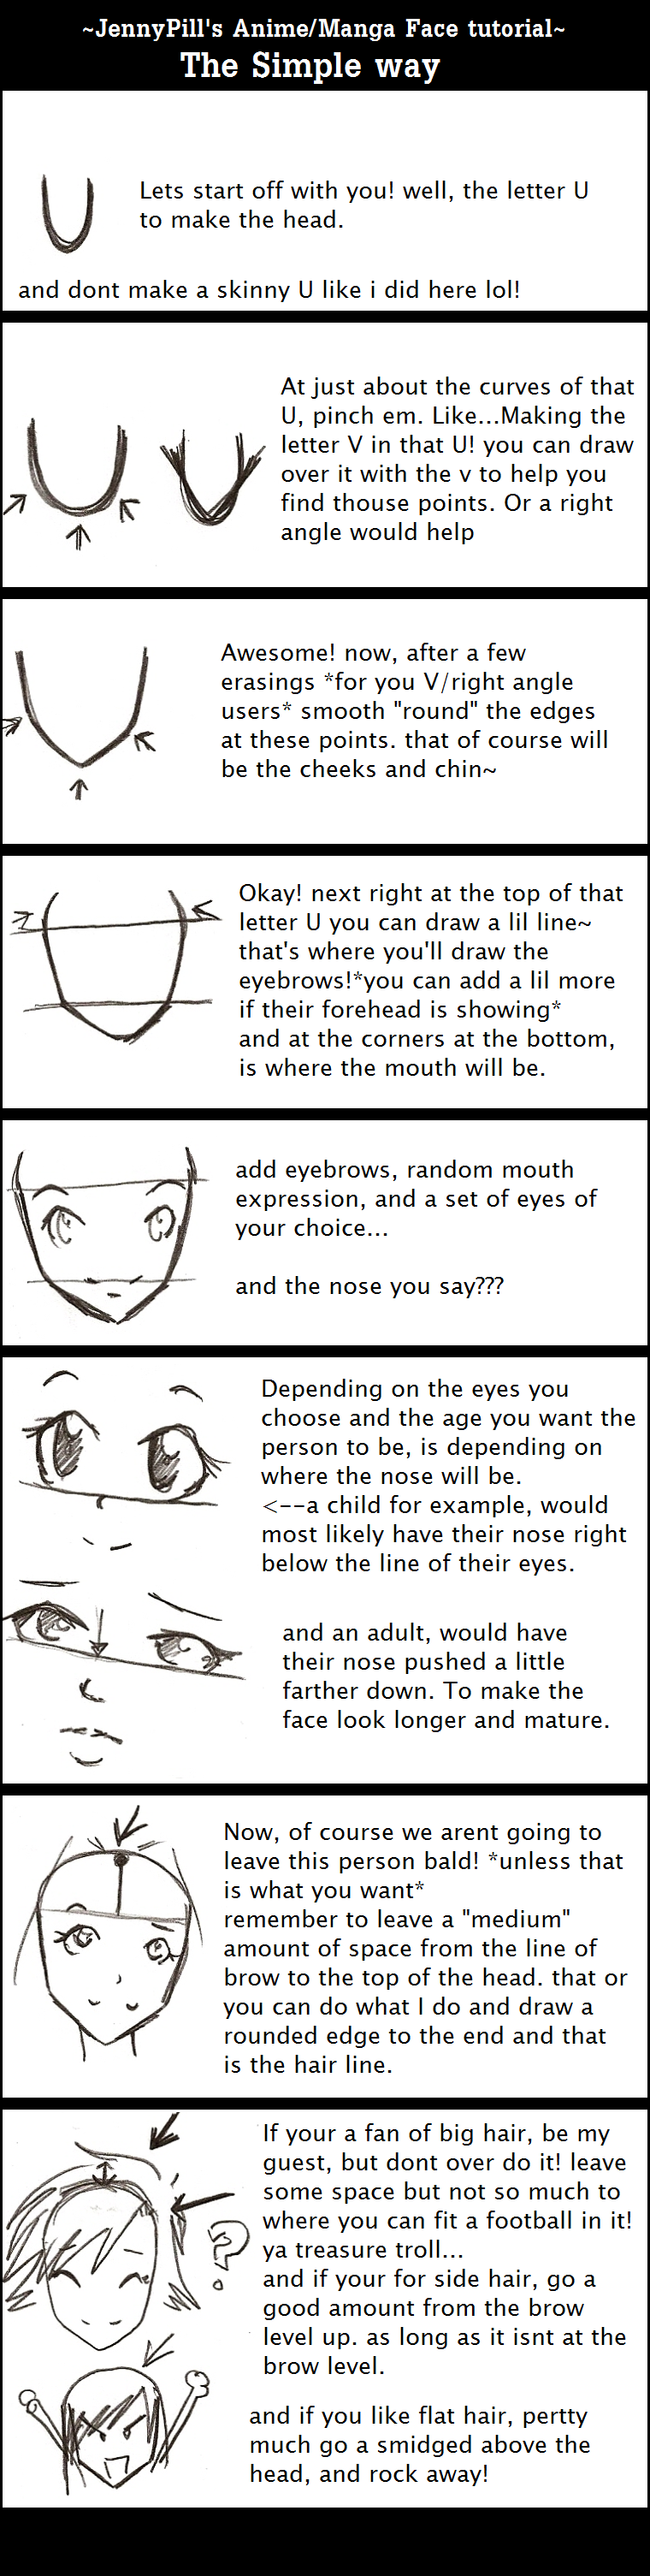 How to draw Anime Face tutoria by TheJennyPill on DeviantArt